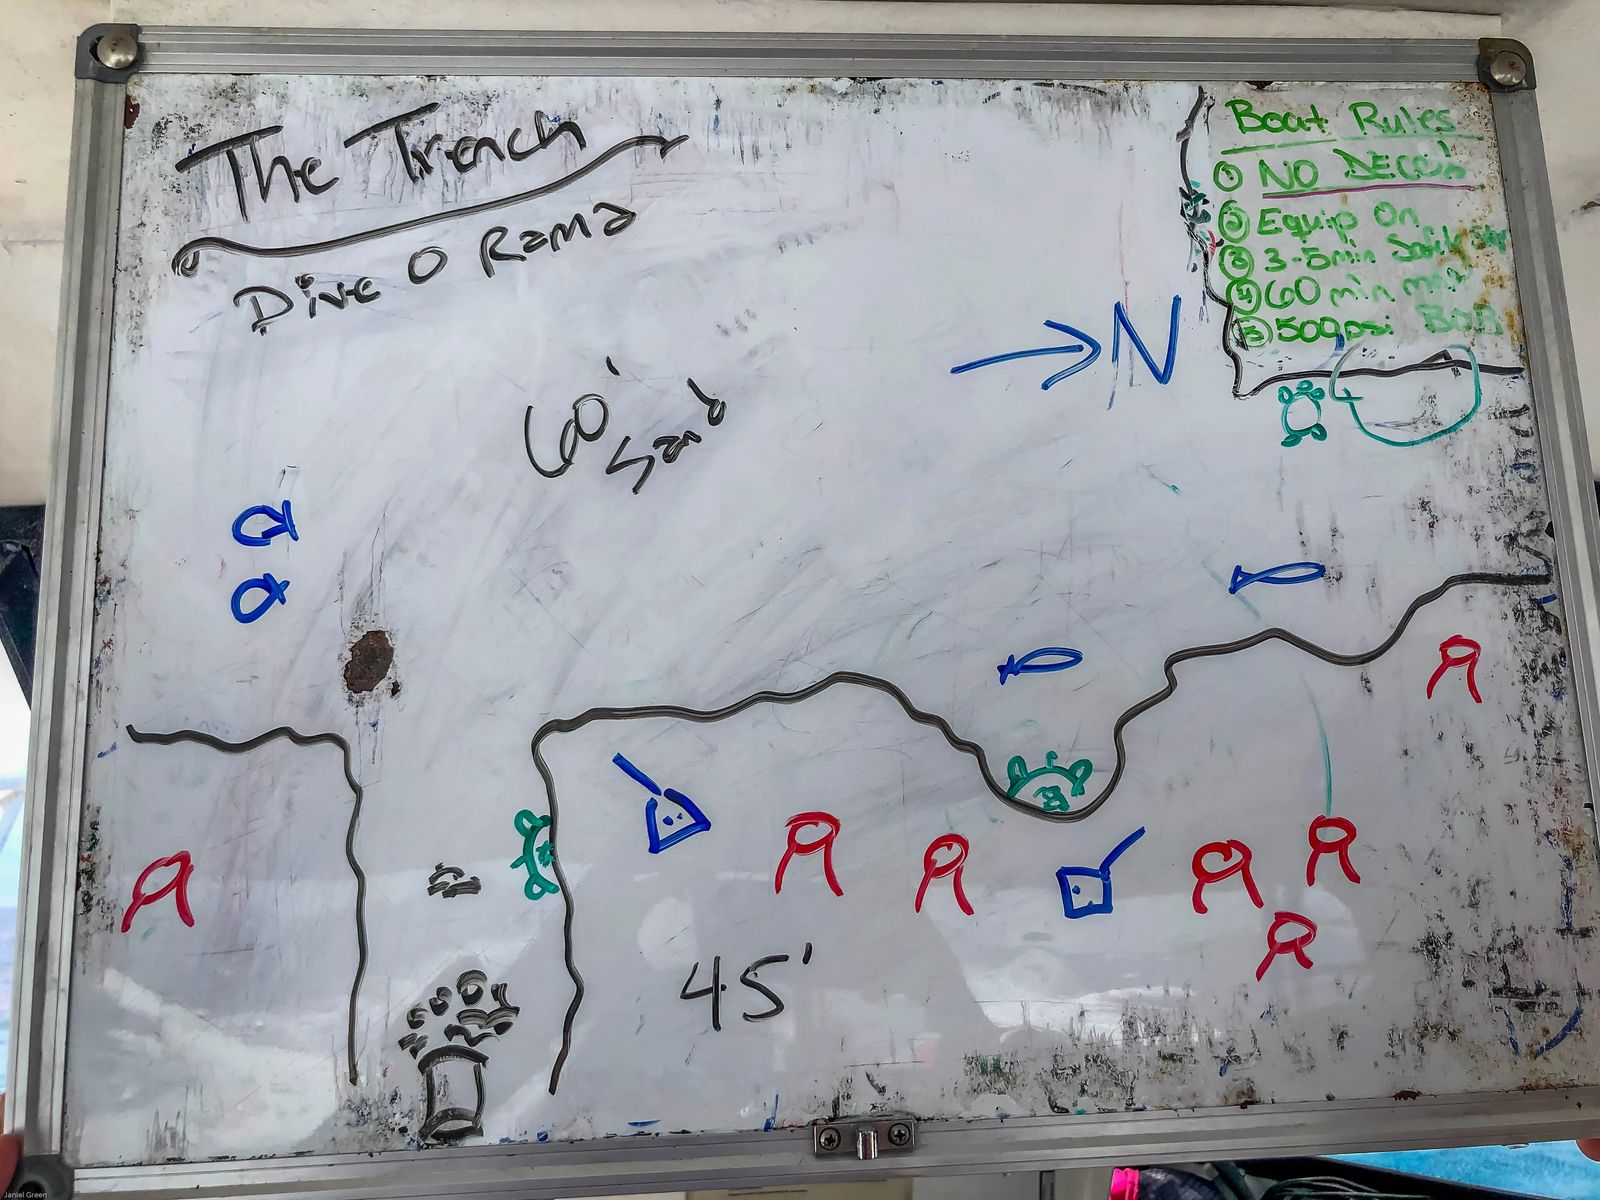 drawing of the trench on a white board. There are small fish drawn on the board, with turtles, manta rays, crab, and a 45 foot depth indicated 